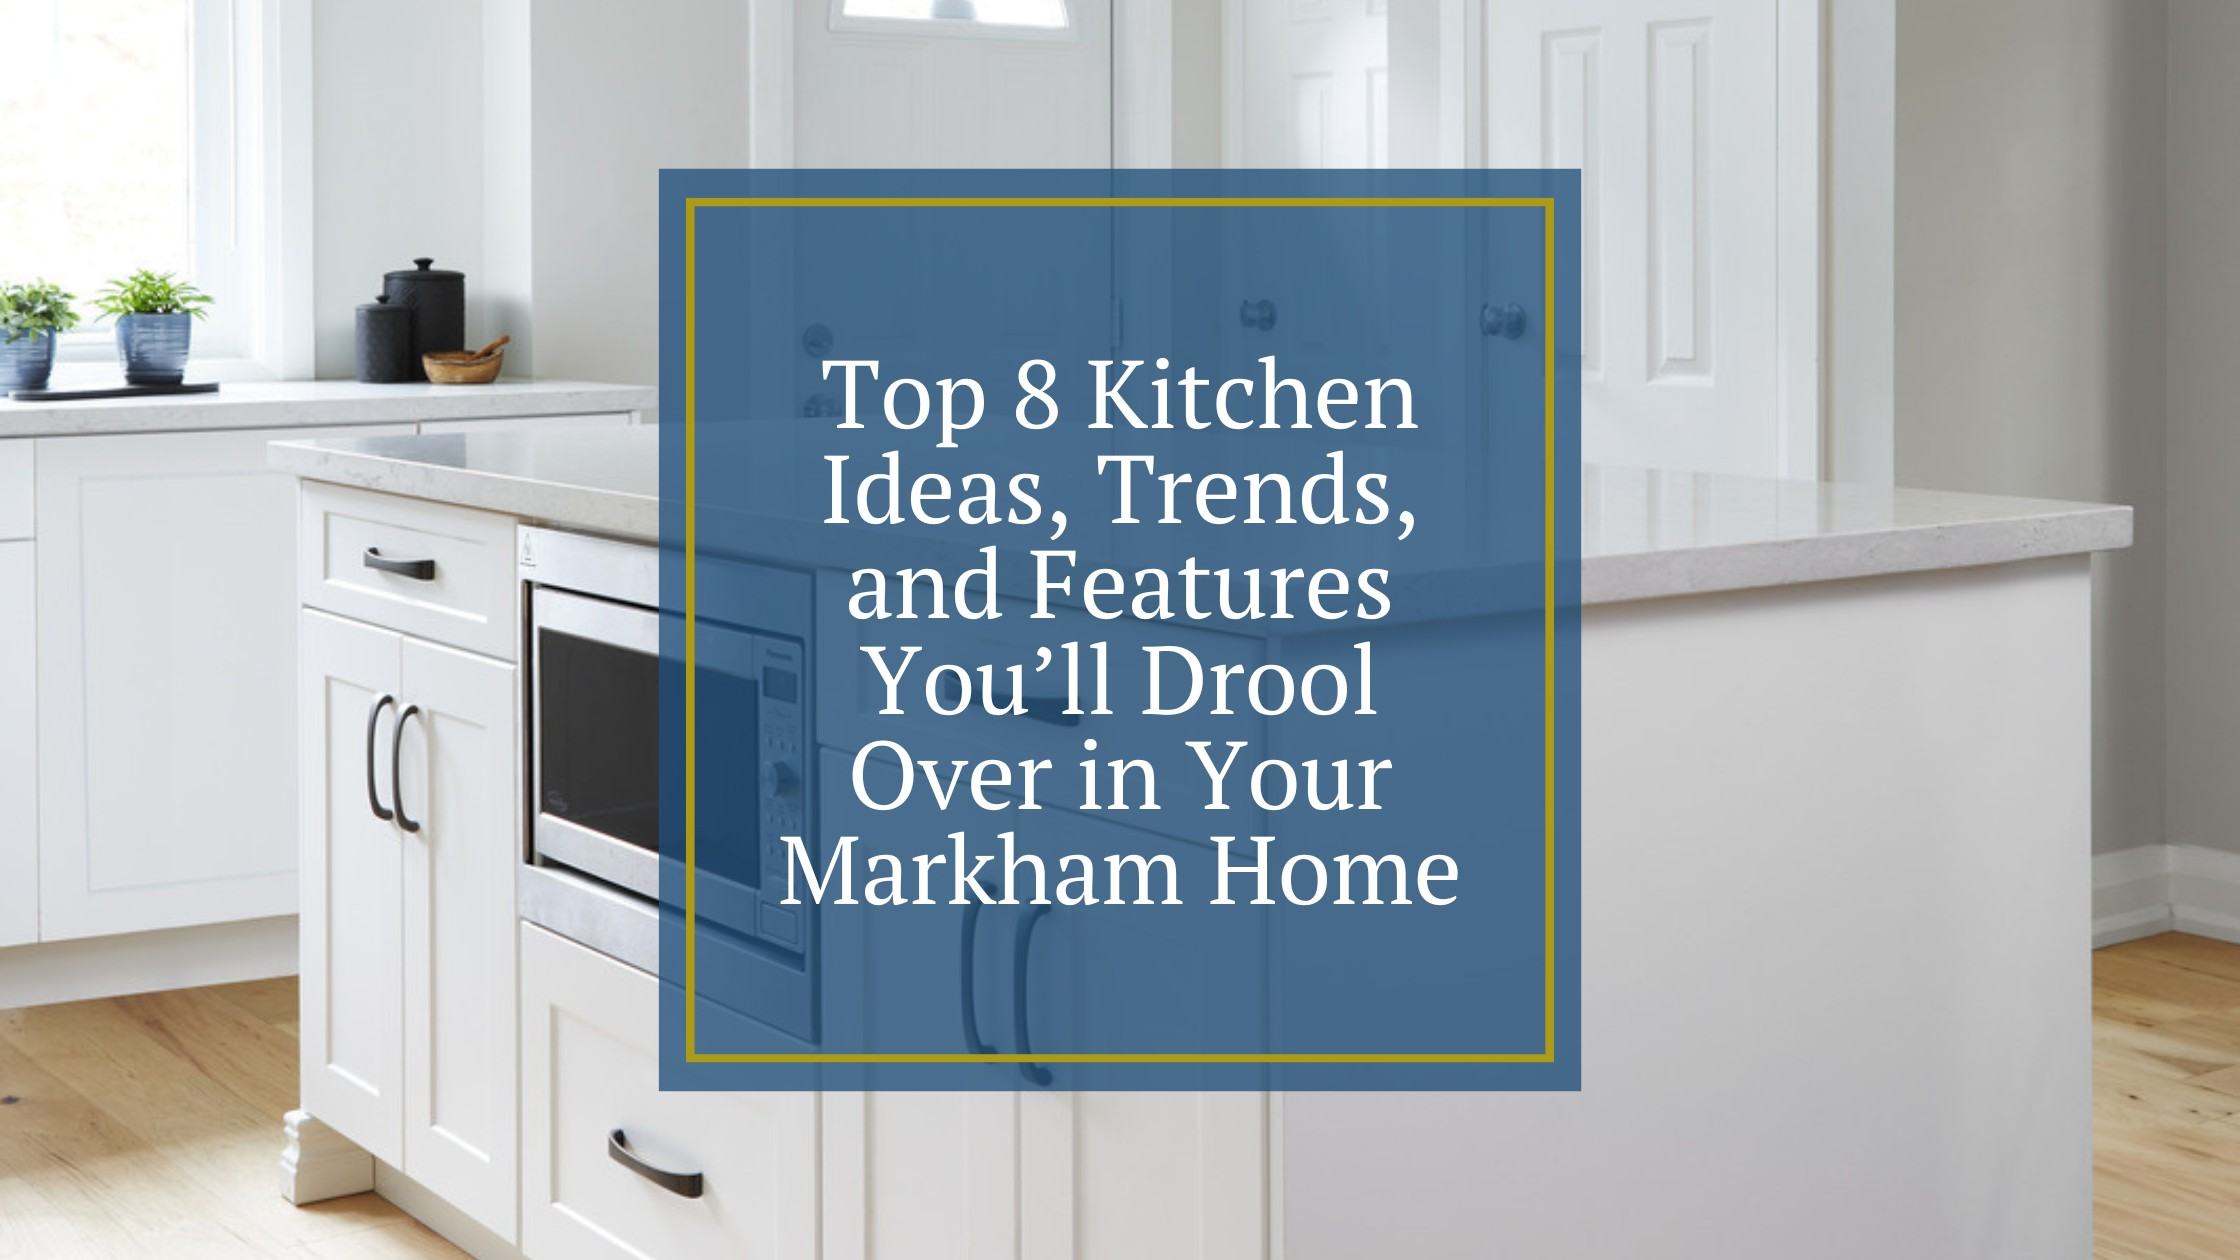 Top 8 Kitchen Ideas, Trends, and Features You’ll Drool Over in Your Markham Home